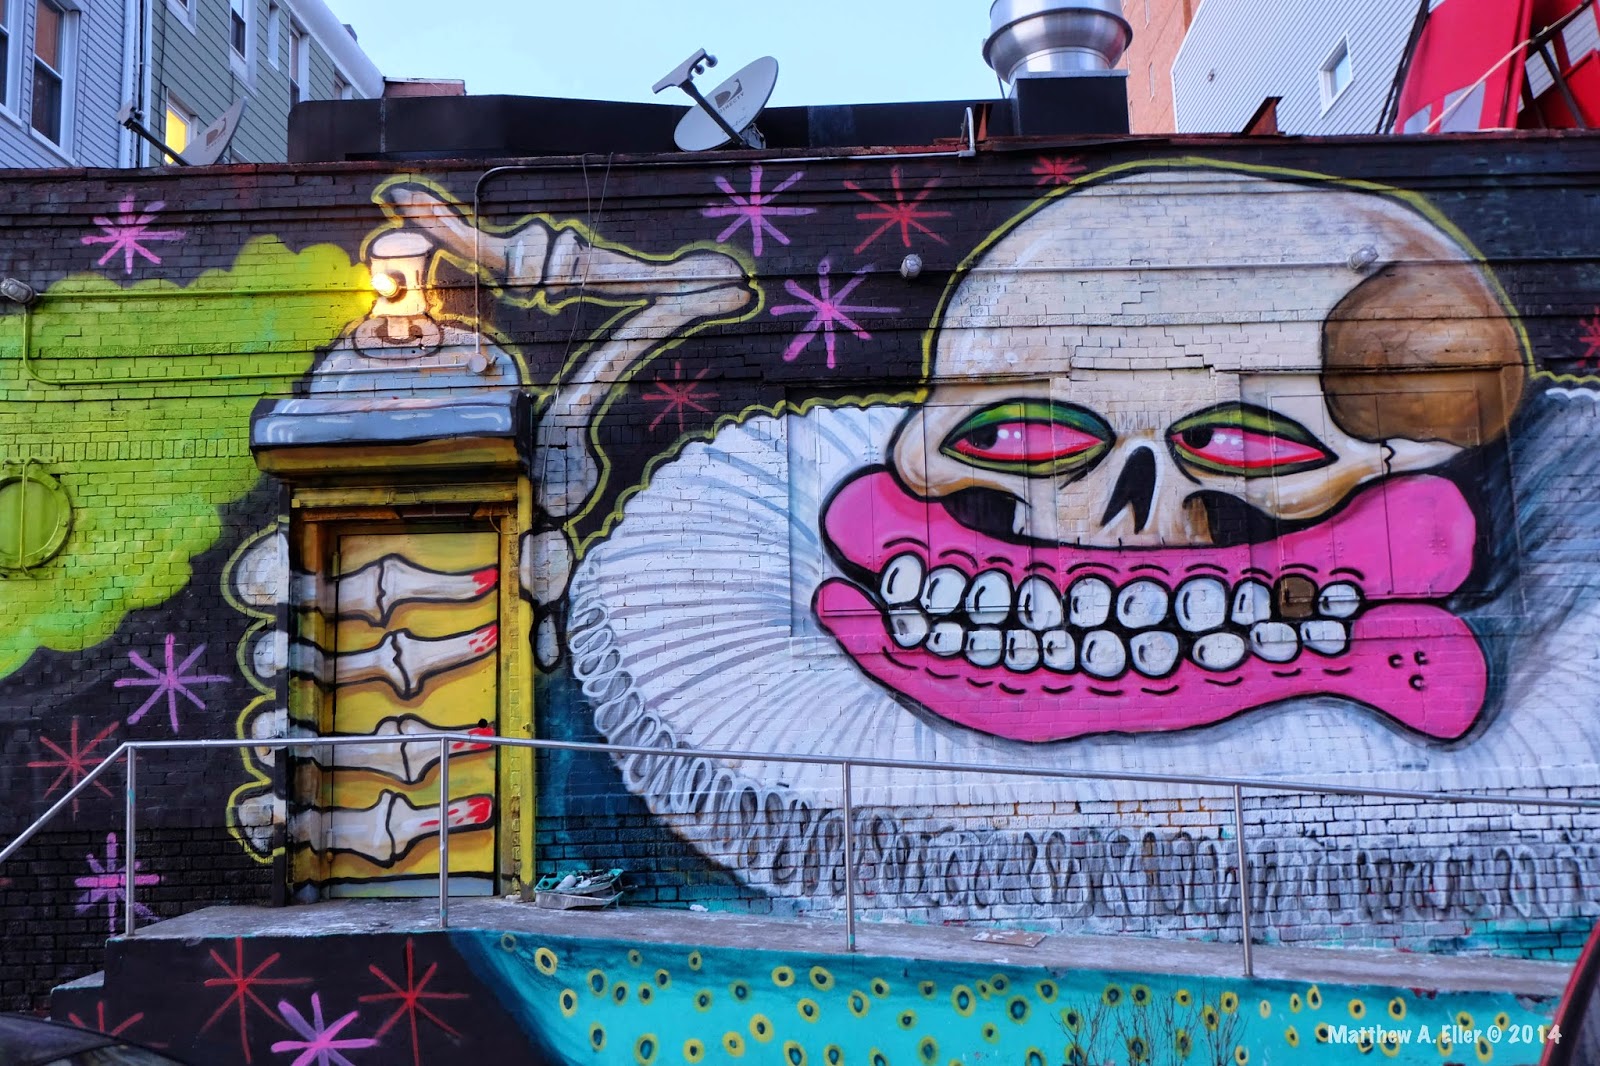 Sweet Toof paints a new mural in WIlliamsburg Brooklyn, NYC ...